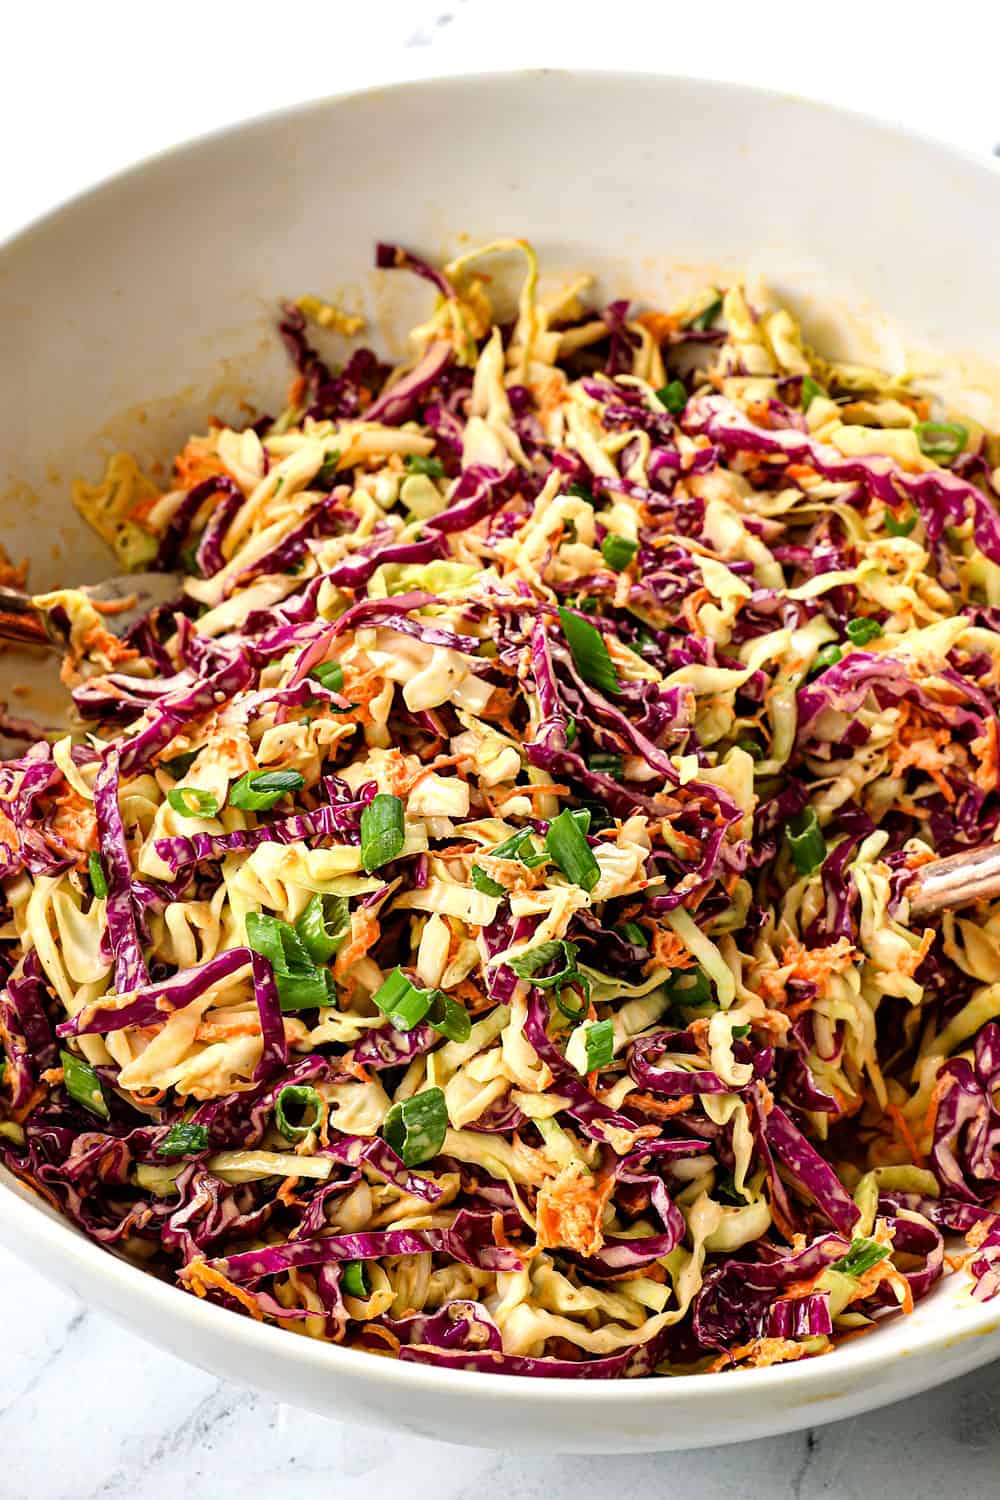 showing how to make pulled pork recipe by tossing cabbage, carrots and green onions with dressing